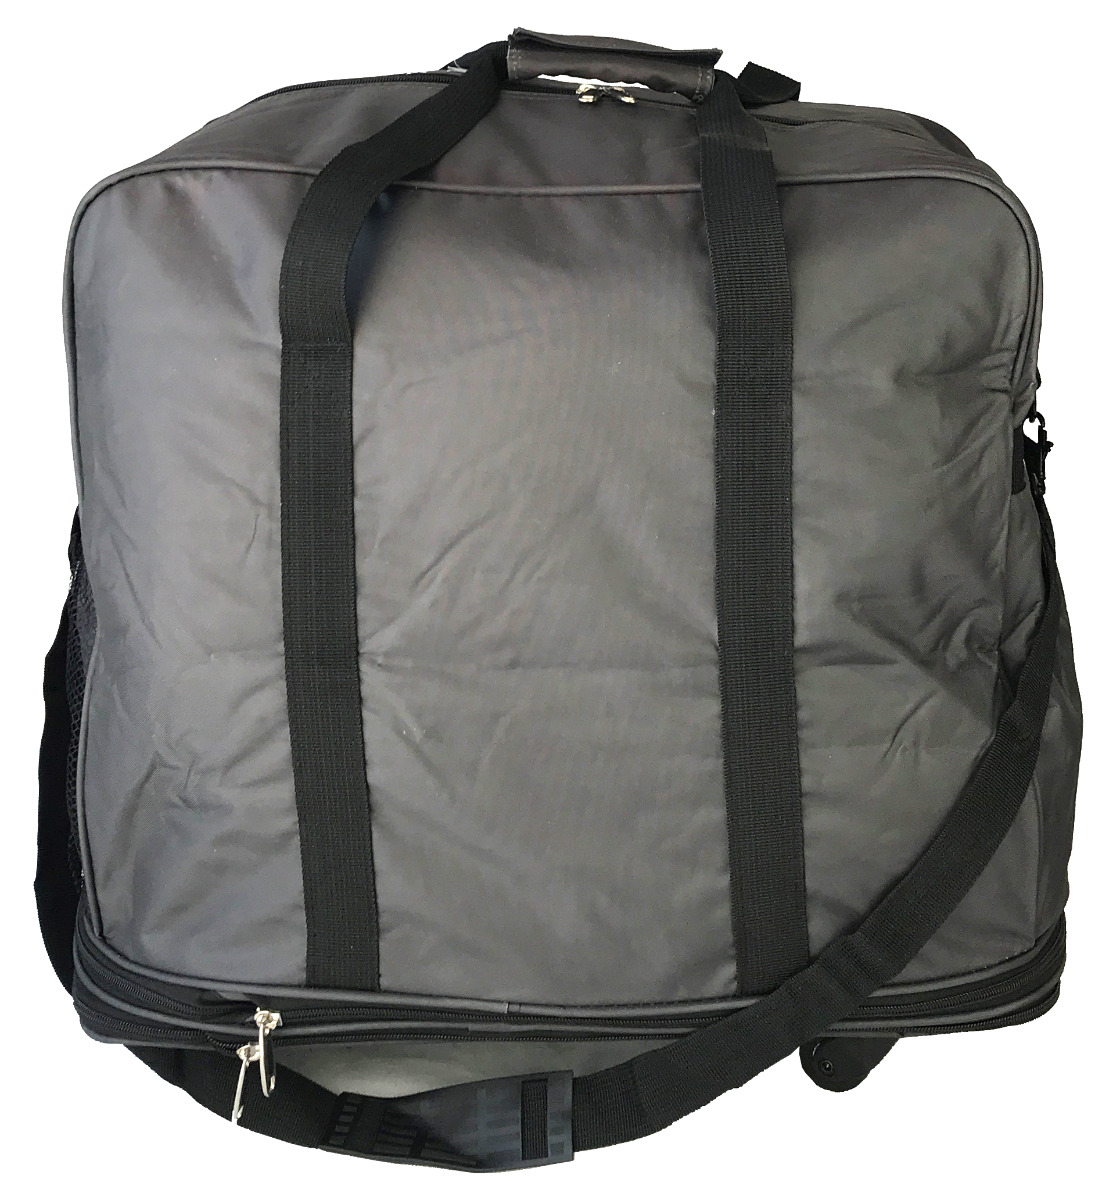 Download TALL DUFFLE BAG ON WHEELS